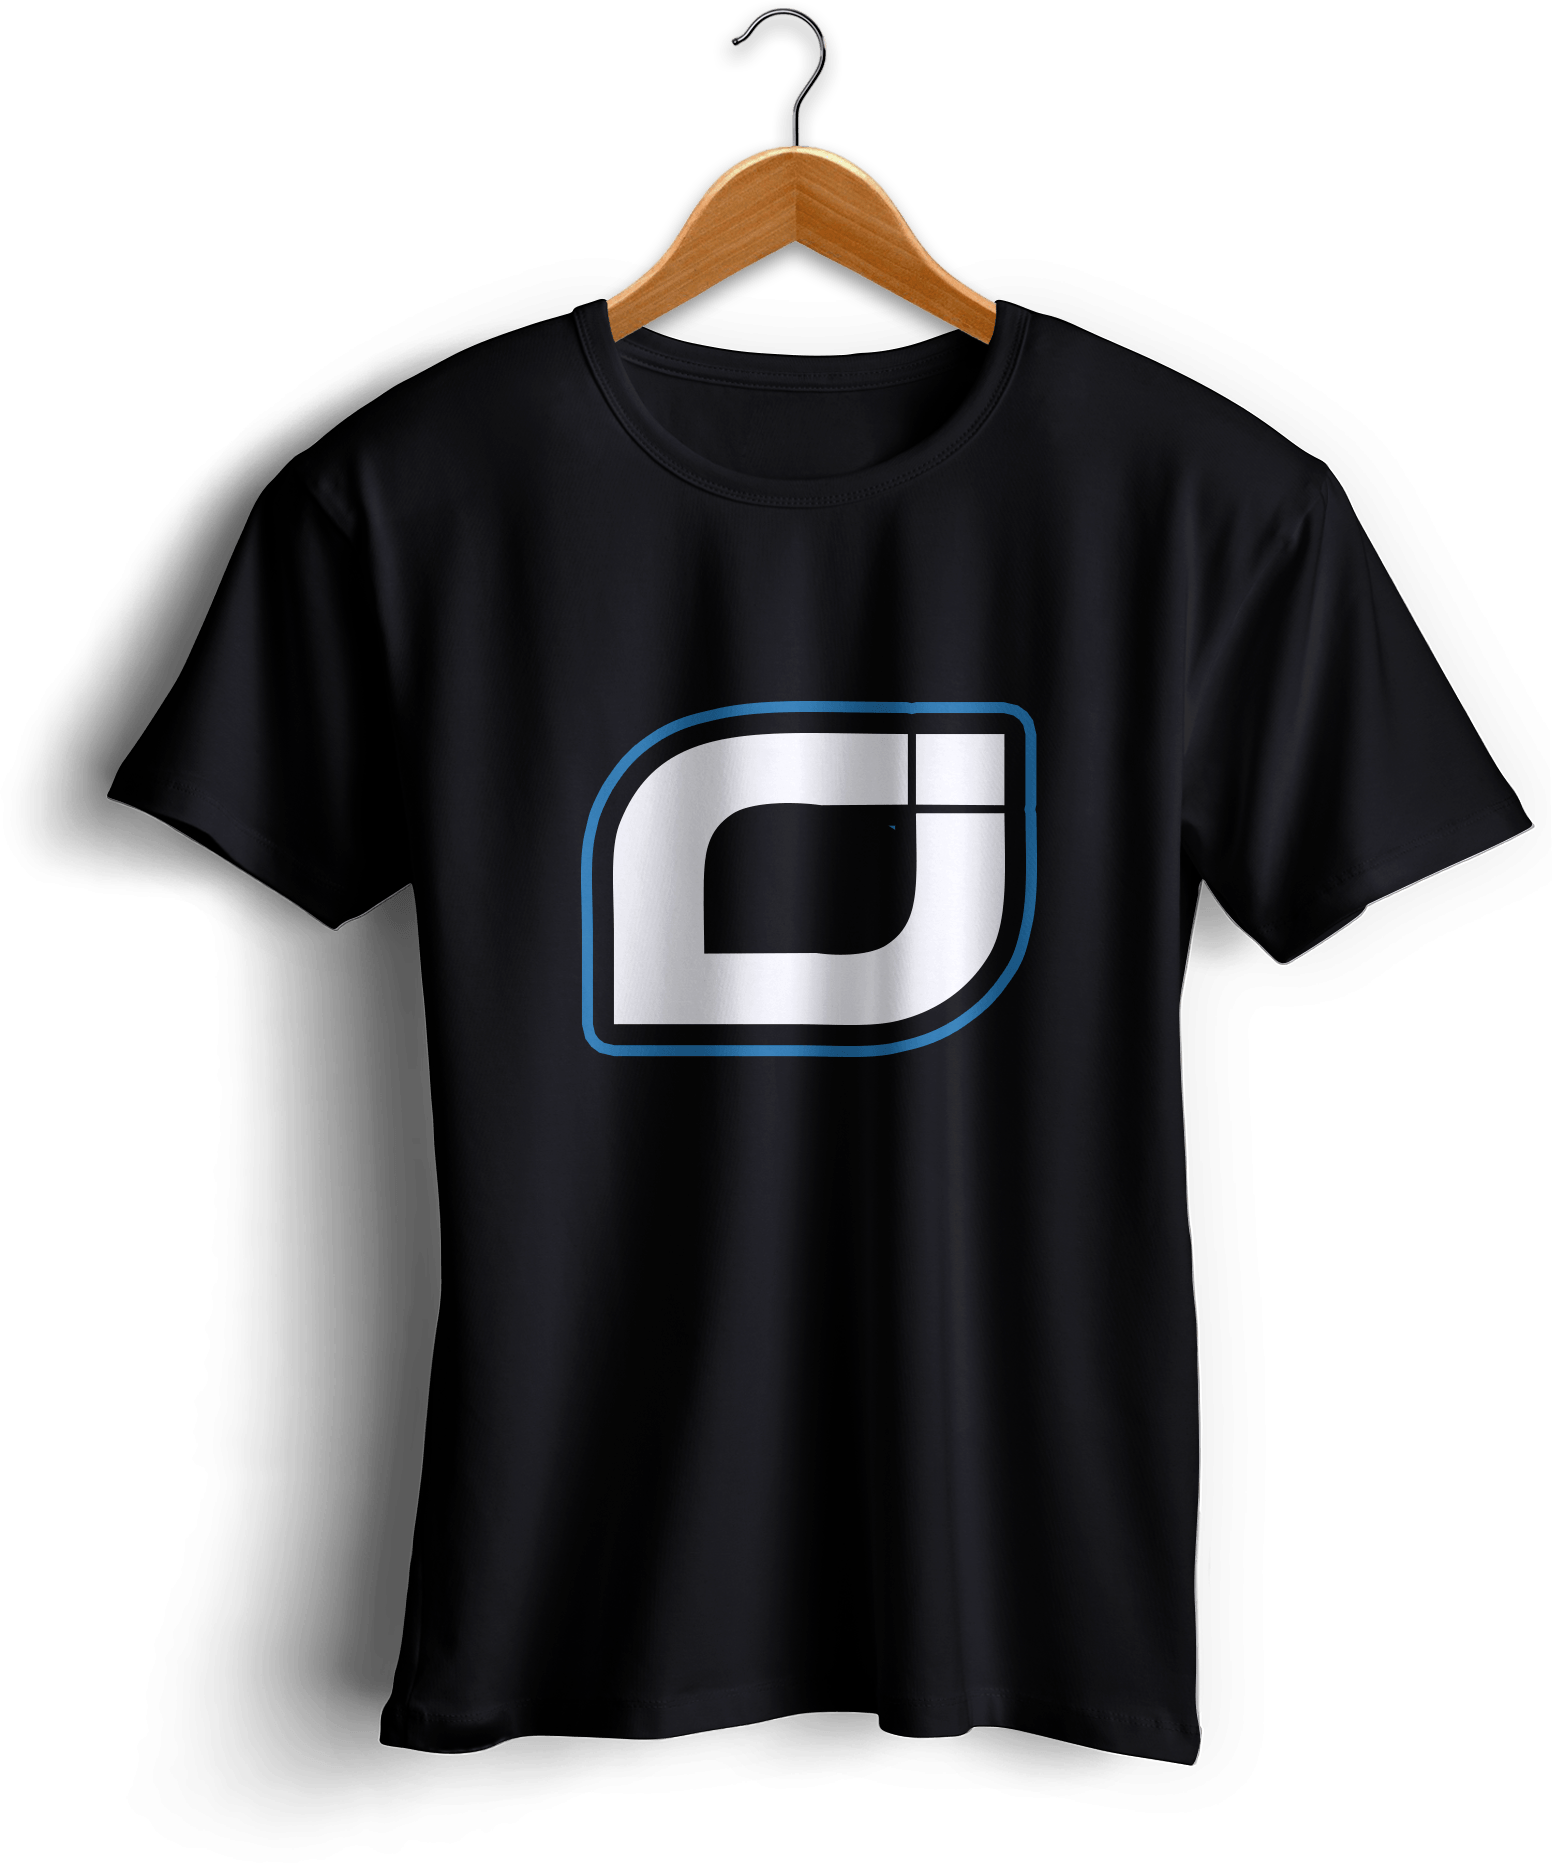 Obey Supremacy Logo - Obey Supremacy T-Shirt – Cranium Apparel